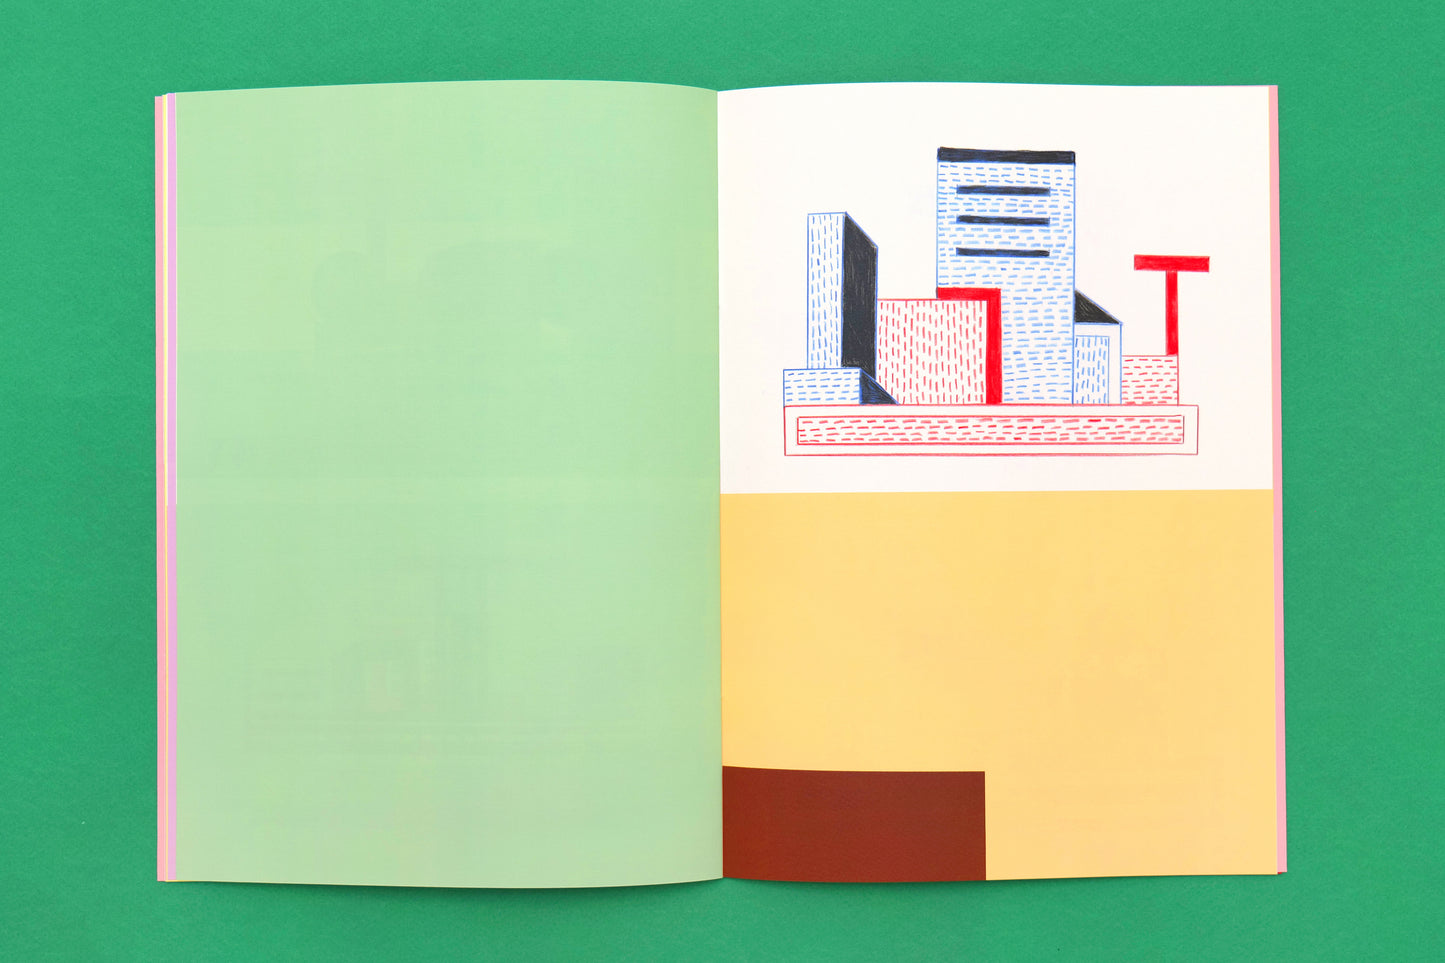 Sometimes Making Something Leads to Nothing, de Nathalie Du Pasquier